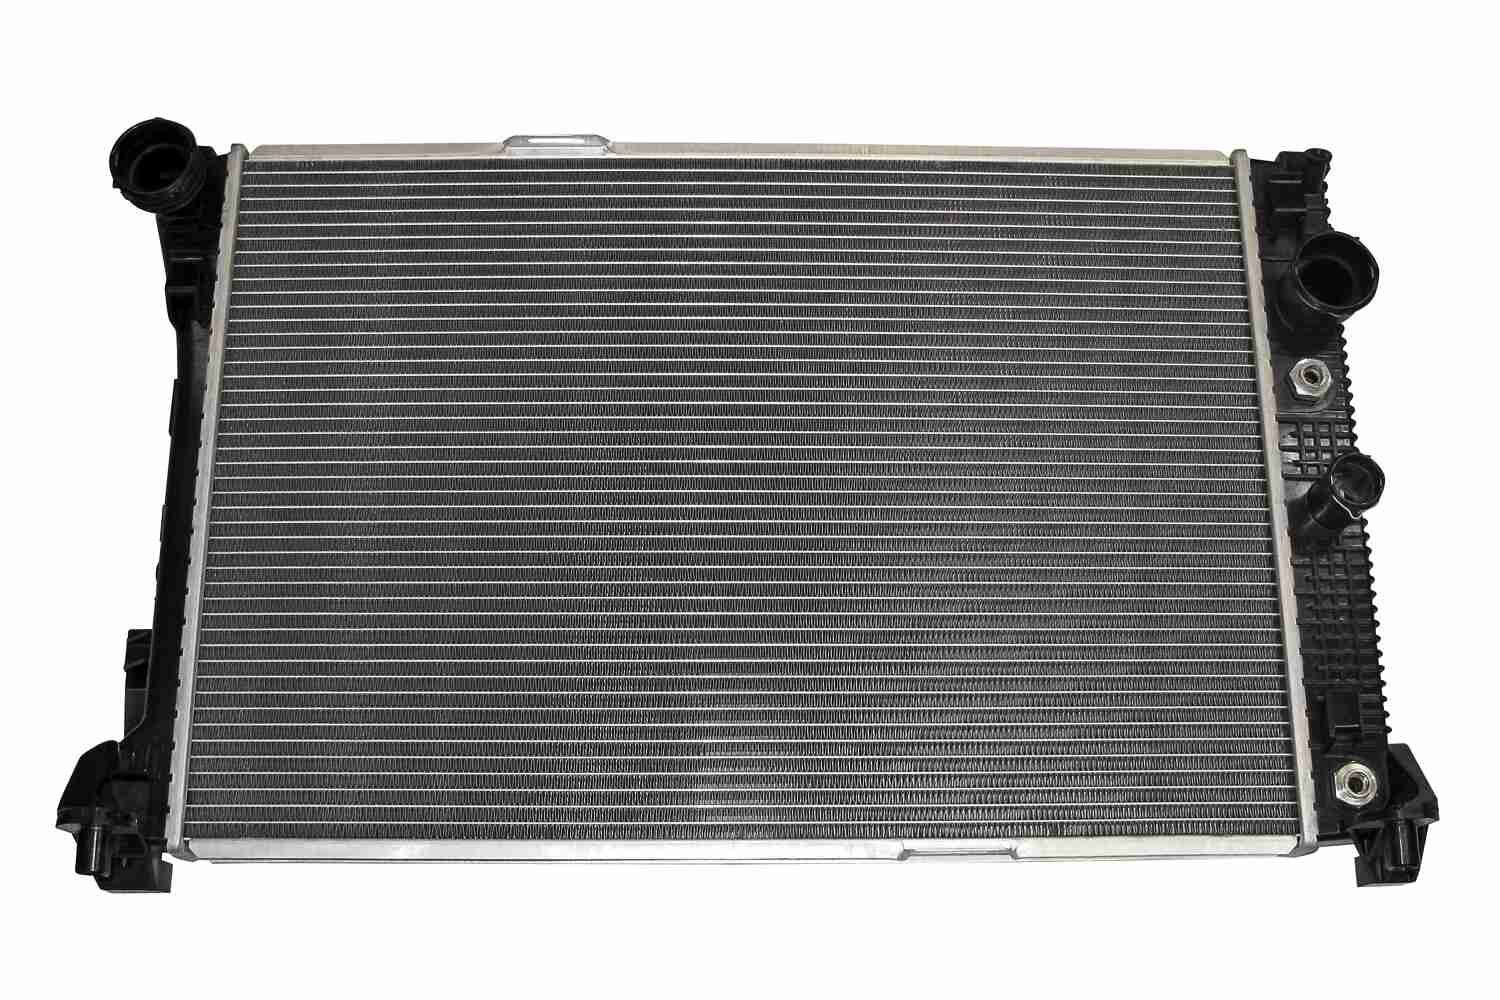 VEMO V30-60-1275 Engine radiator for vehicles with/without air conditioning, 643 x 438 x 40 mm, Original VEMO Quality